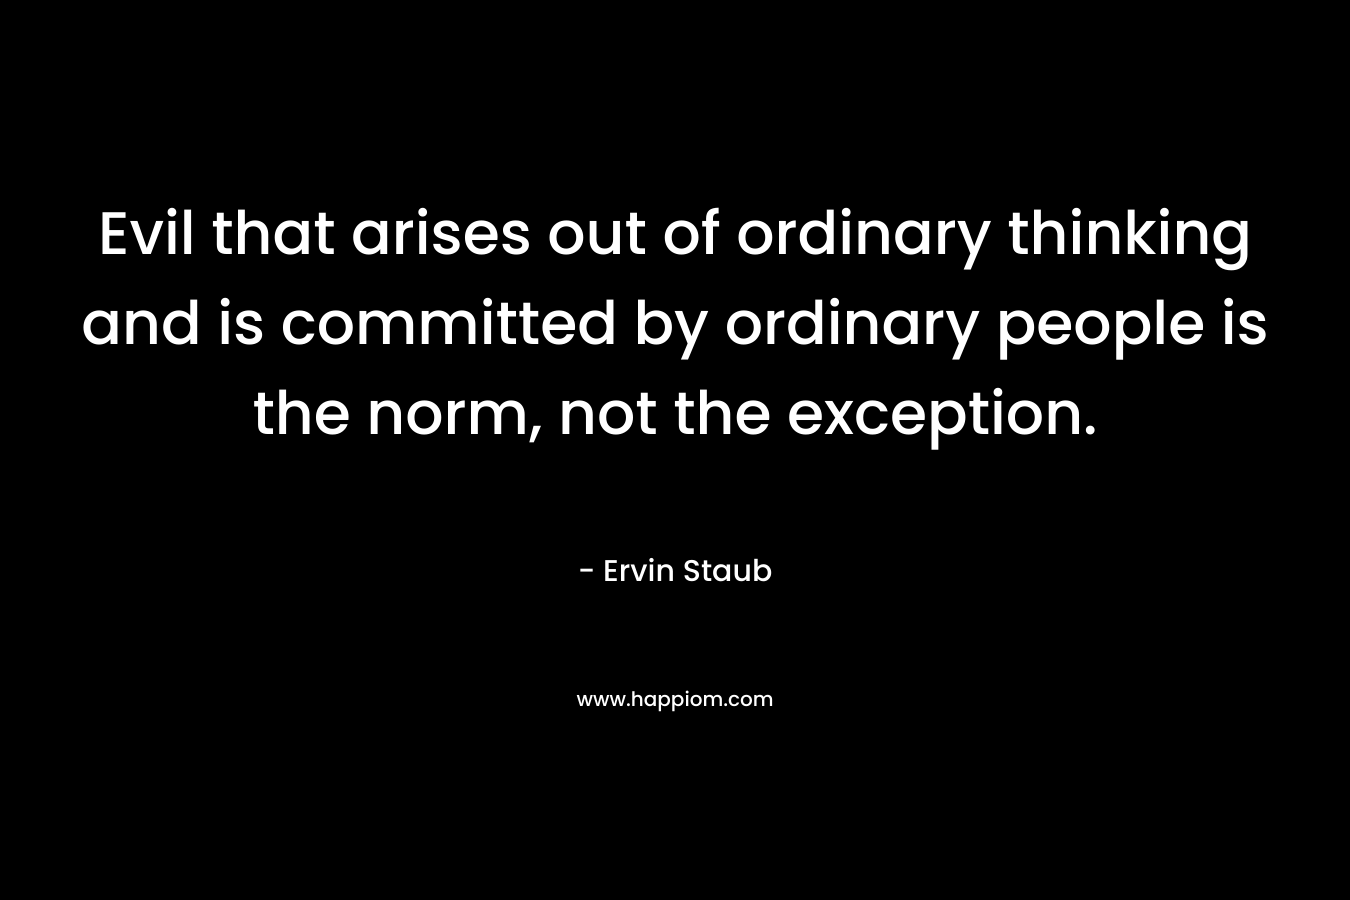 Evil that arises out of ordinary thinking and is committed by ordinary people is the norm, not the exception. – Ervin Staub